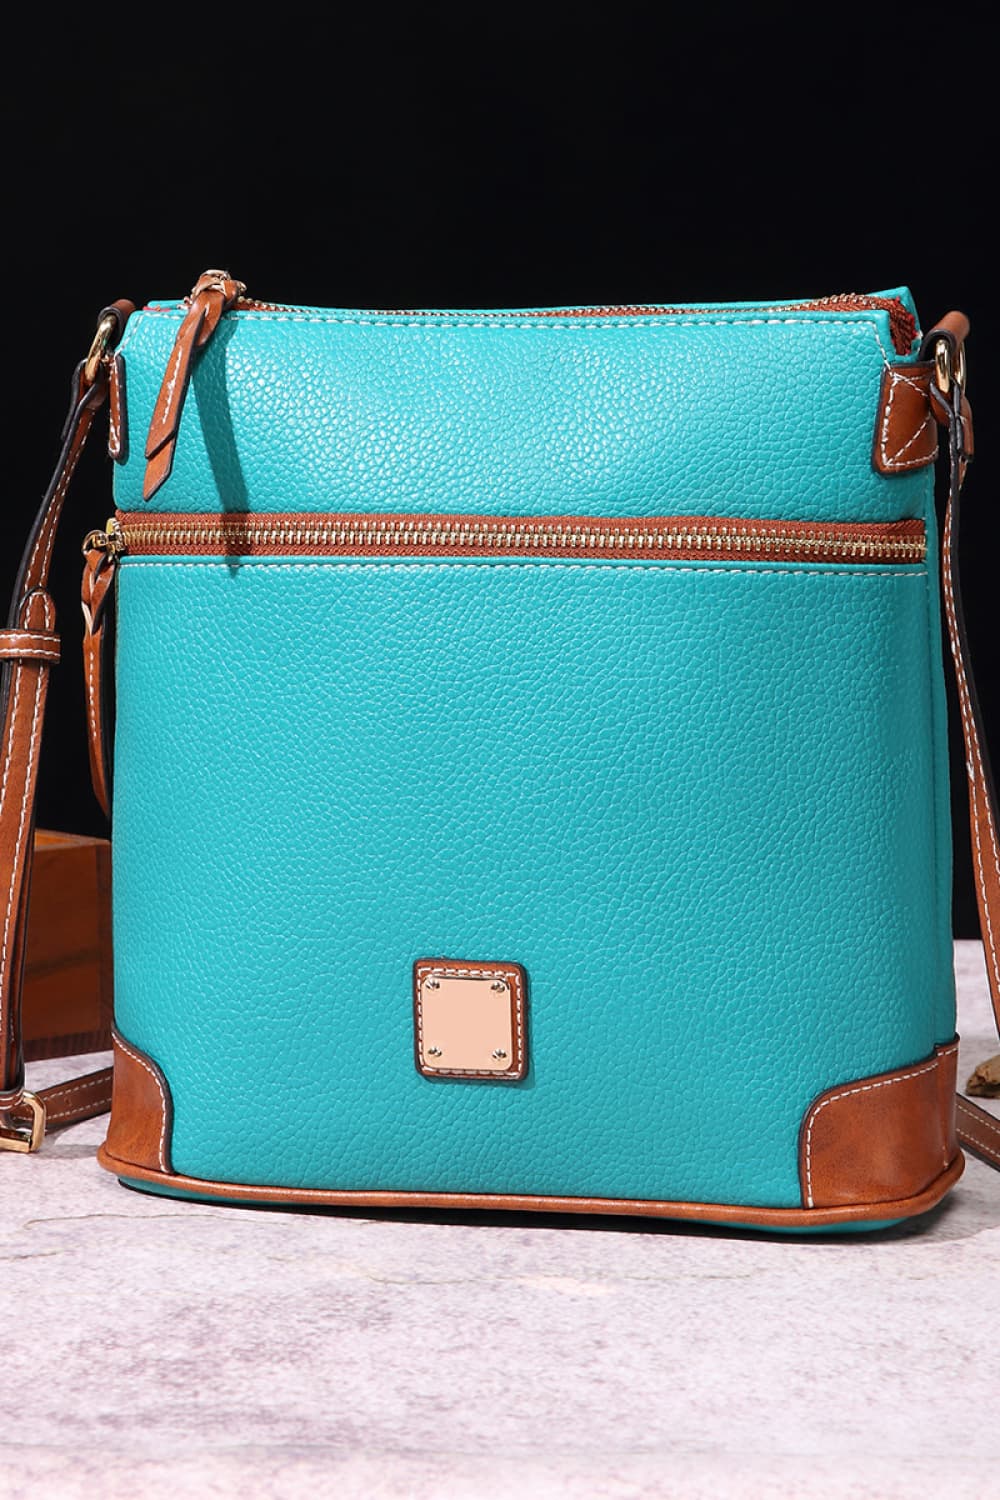 PU Leather Crossbody Bag With Zippers